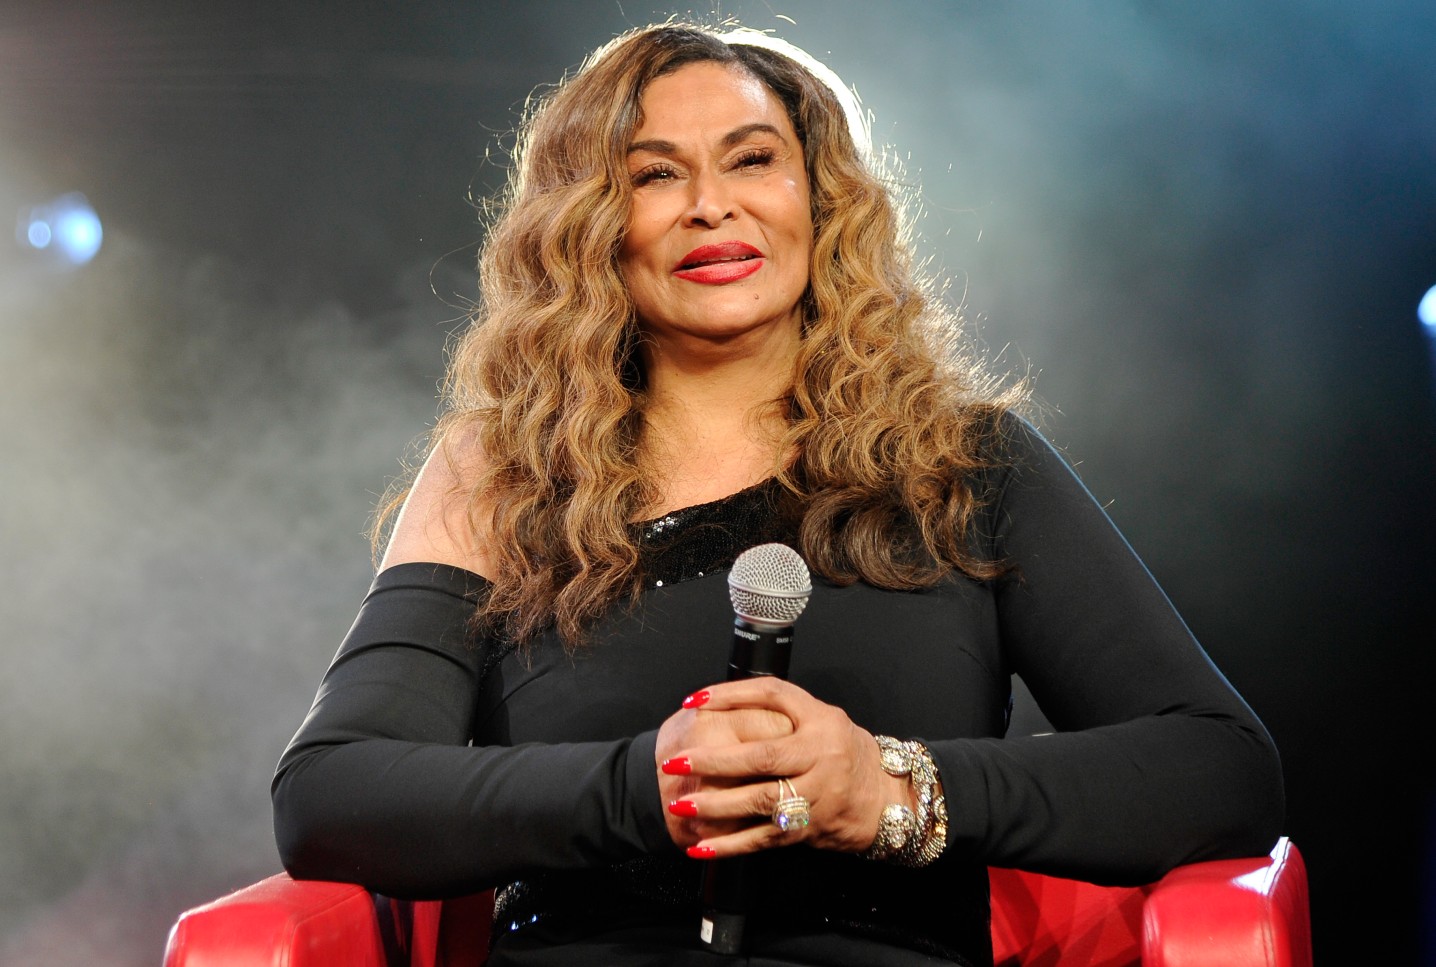 Tina Lawson Pens Sweet Birthday Note To Blue Ivy: “My Little Capricorn Twin”